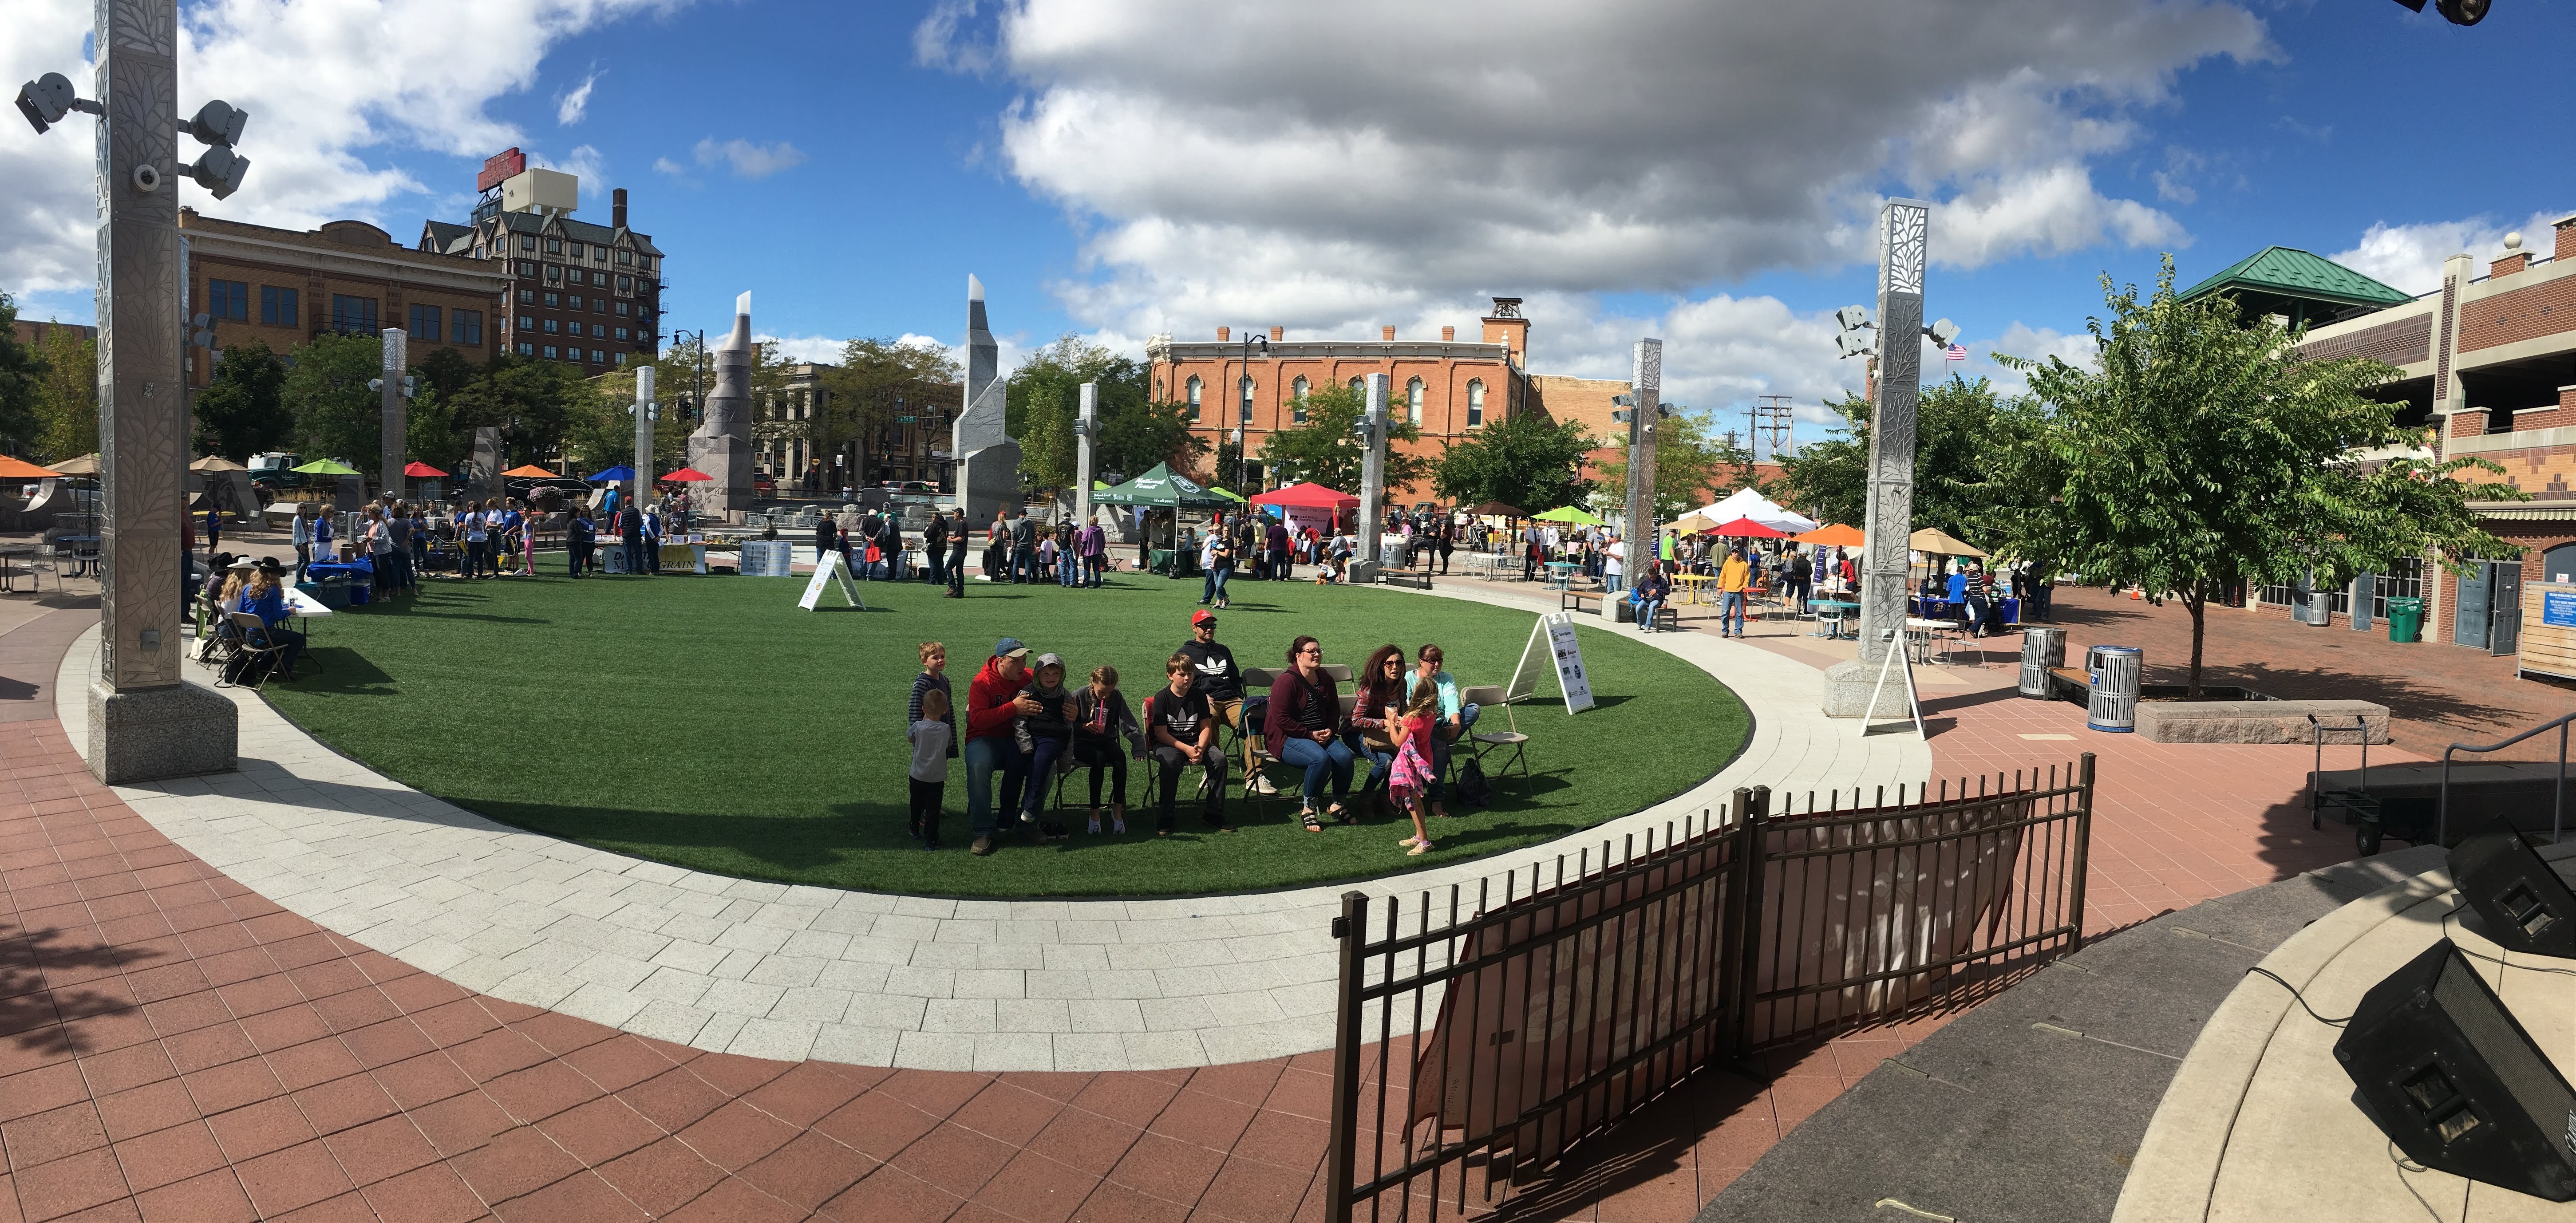 a bigger group of people in a town square doing various things